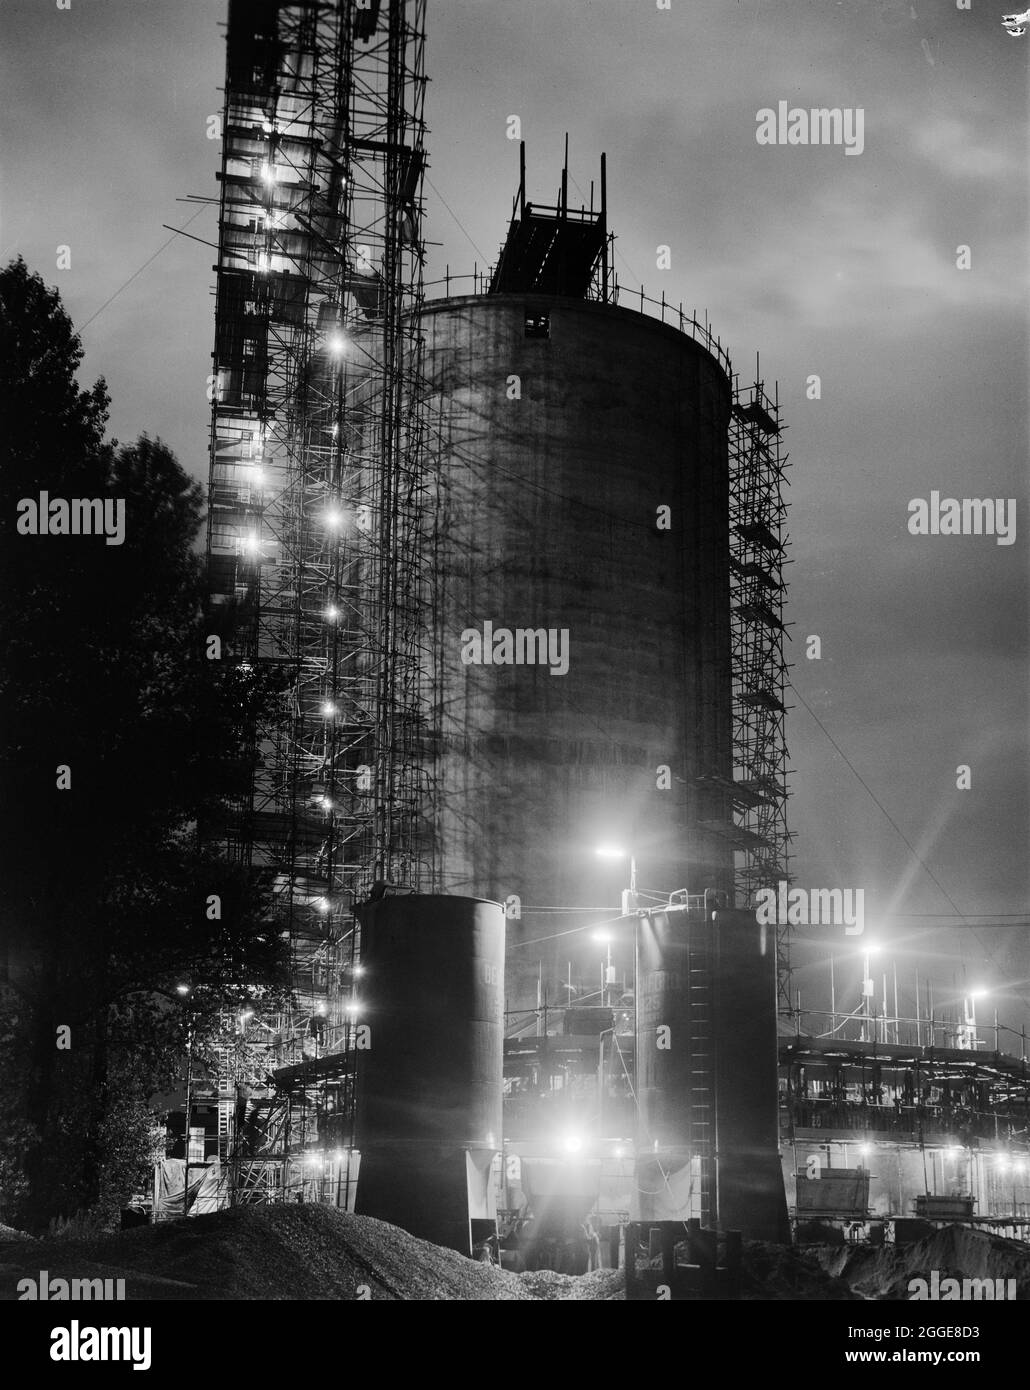 A floodlit view of a sugar silo under construction at Allscott Sugar Beet Factory. A sugar beet factory was at Allscott from 1927 until it closed in 2007. Laing built two sugar silos here in 1961 for the British Sugar Corporation who were the owners of the site. Each silo was able to store 10,000 tons of granulated sugar and at the time they were constructed, they were the tallest that Laing had built so far using sliding formwork. This photograph was published in September 1961 in the Laing monthly newsletter 'Team Spirit'. Stock Photo